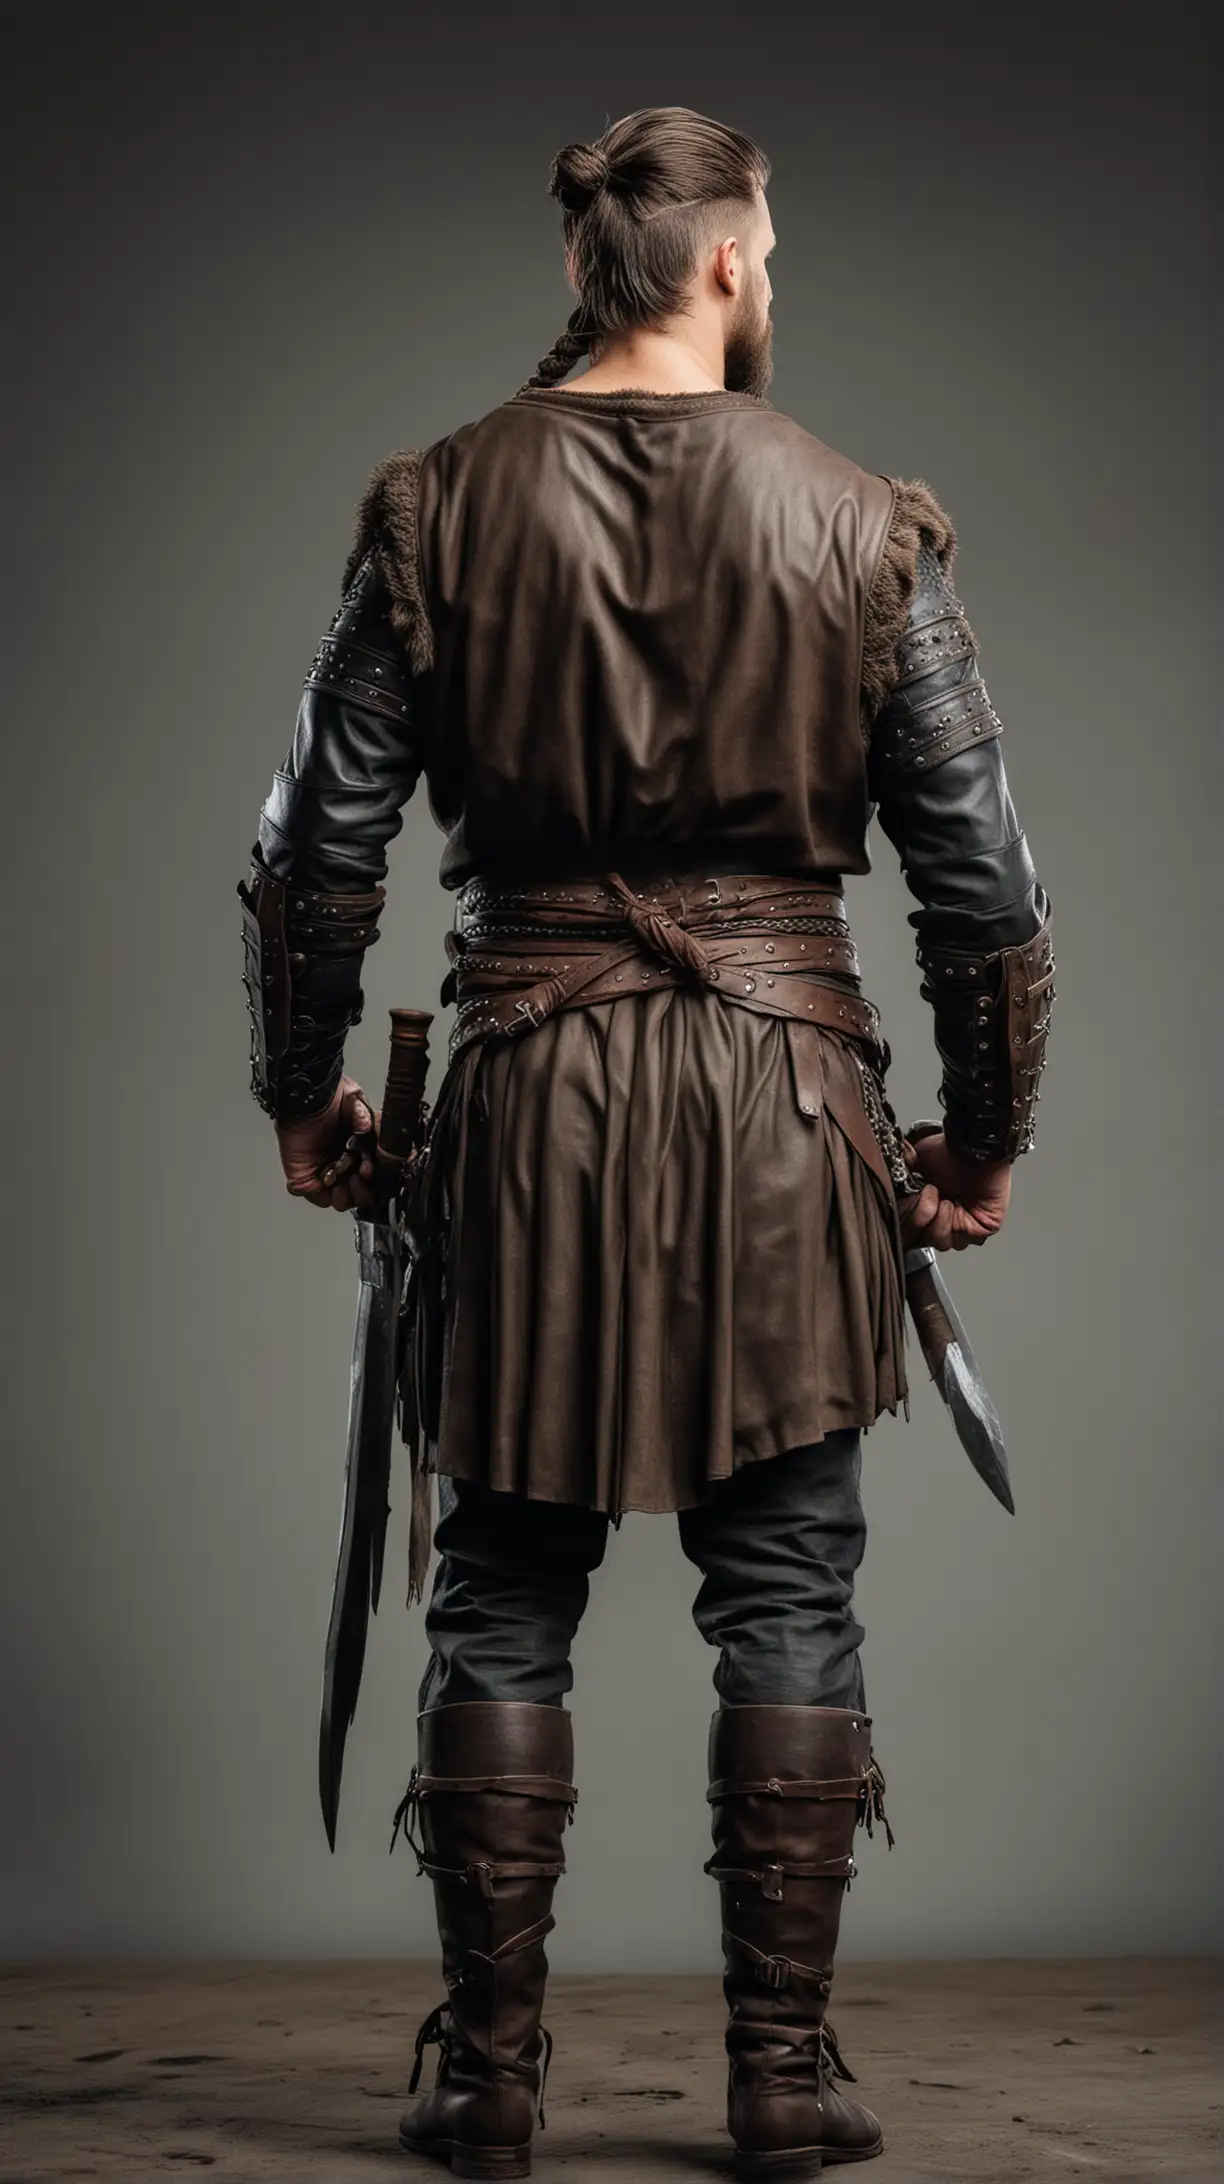 muscular viking warrior, back view, head facing fully forward, no side or face shown, full body, short dark hair tied in knot, viking clothes and weapons, leather sleeves